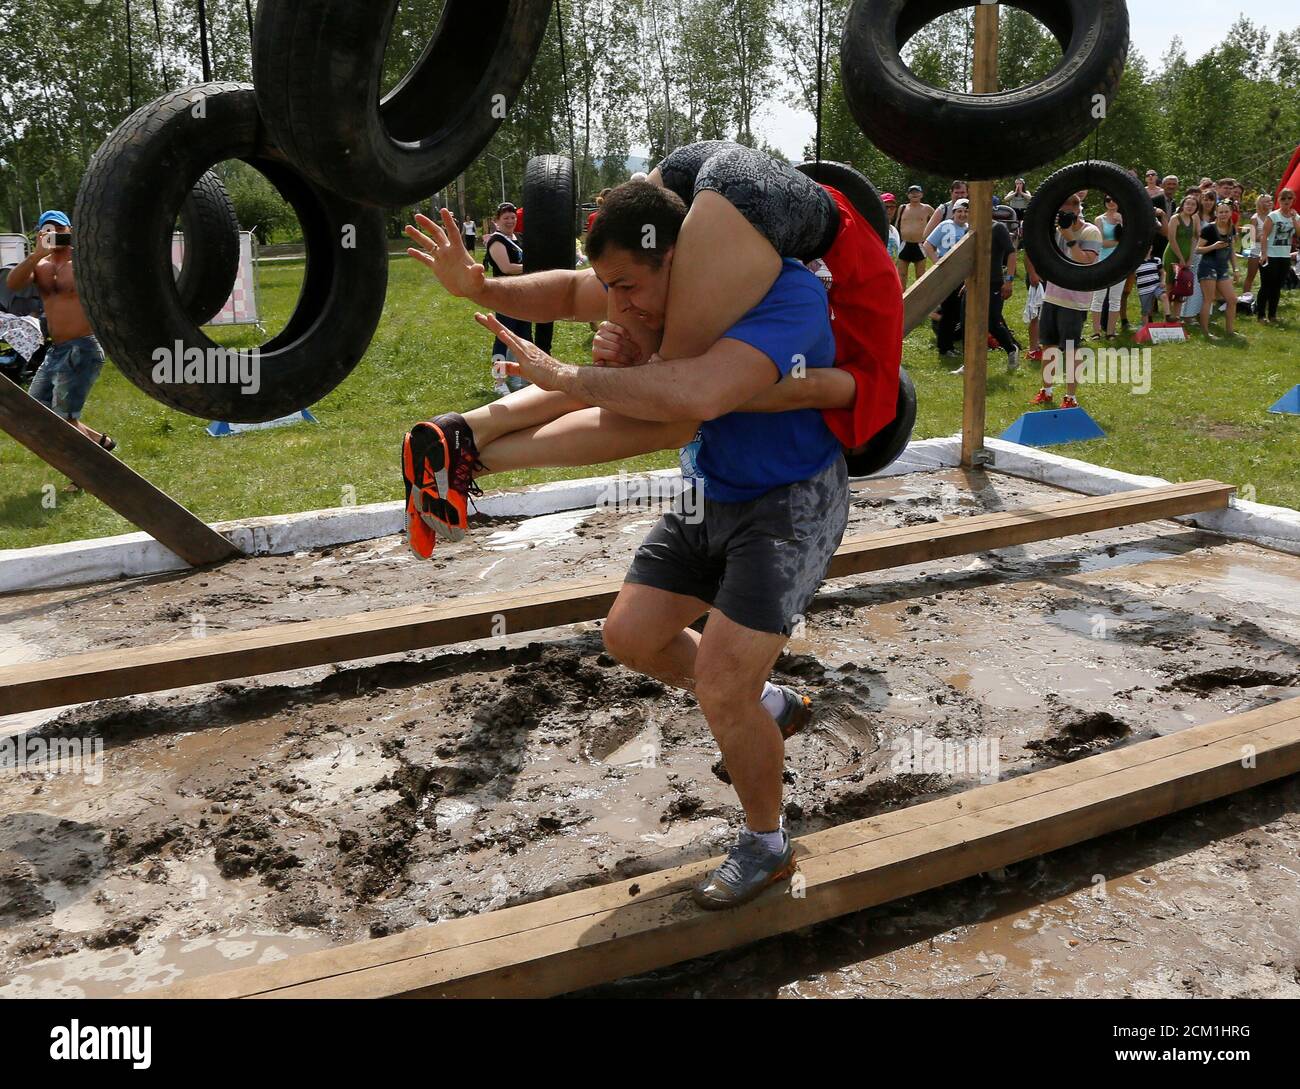 A man carries his wife over an obstacle while racing in the Wife Carrying competititon to mark the City Day in Krasnoyarsk, Siberia, Russia, June 10, 2017. Picture taken June 10, 2017. REUTERS/Ilya Naymushin Stock Photo